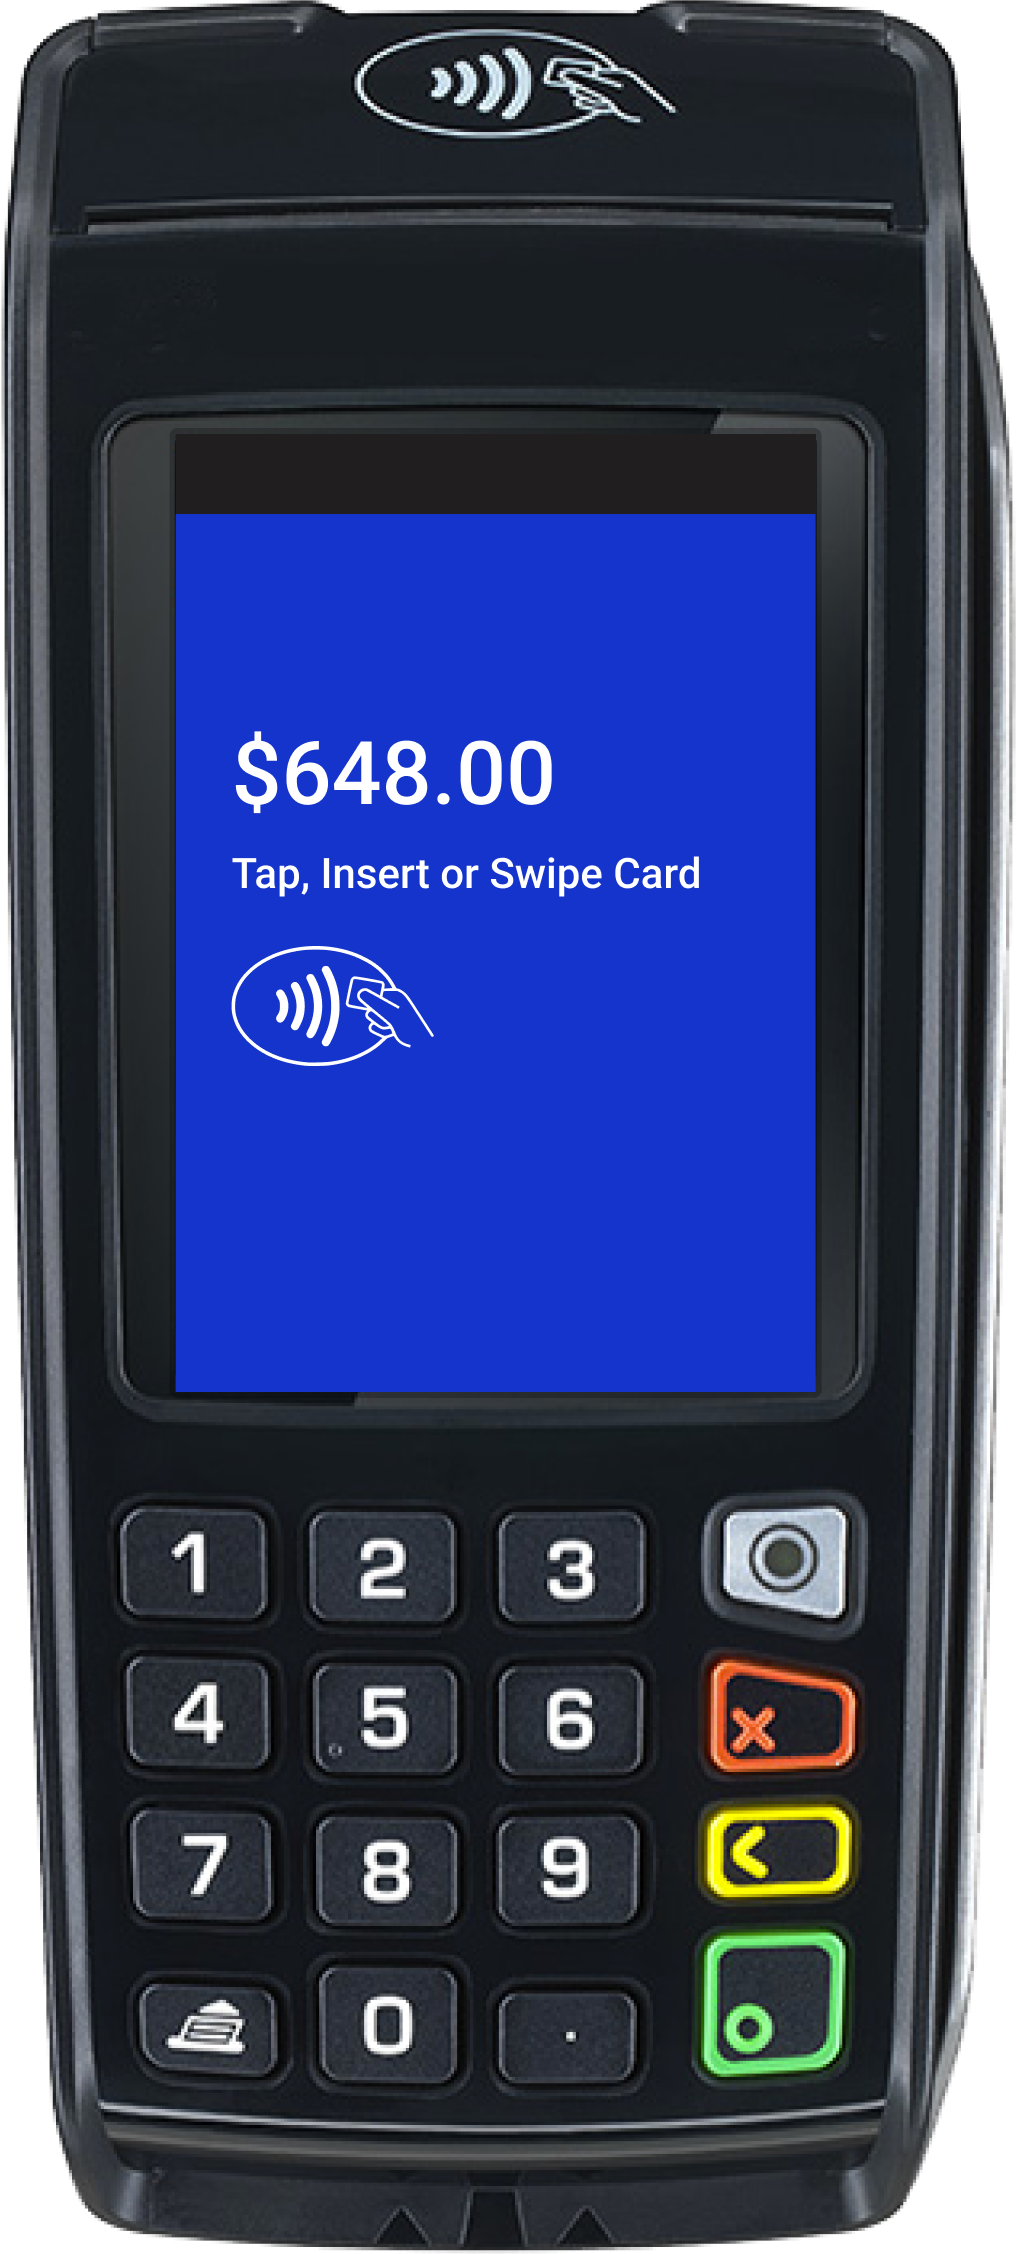 United States portrait 2 style payment terminal, initiate purchase